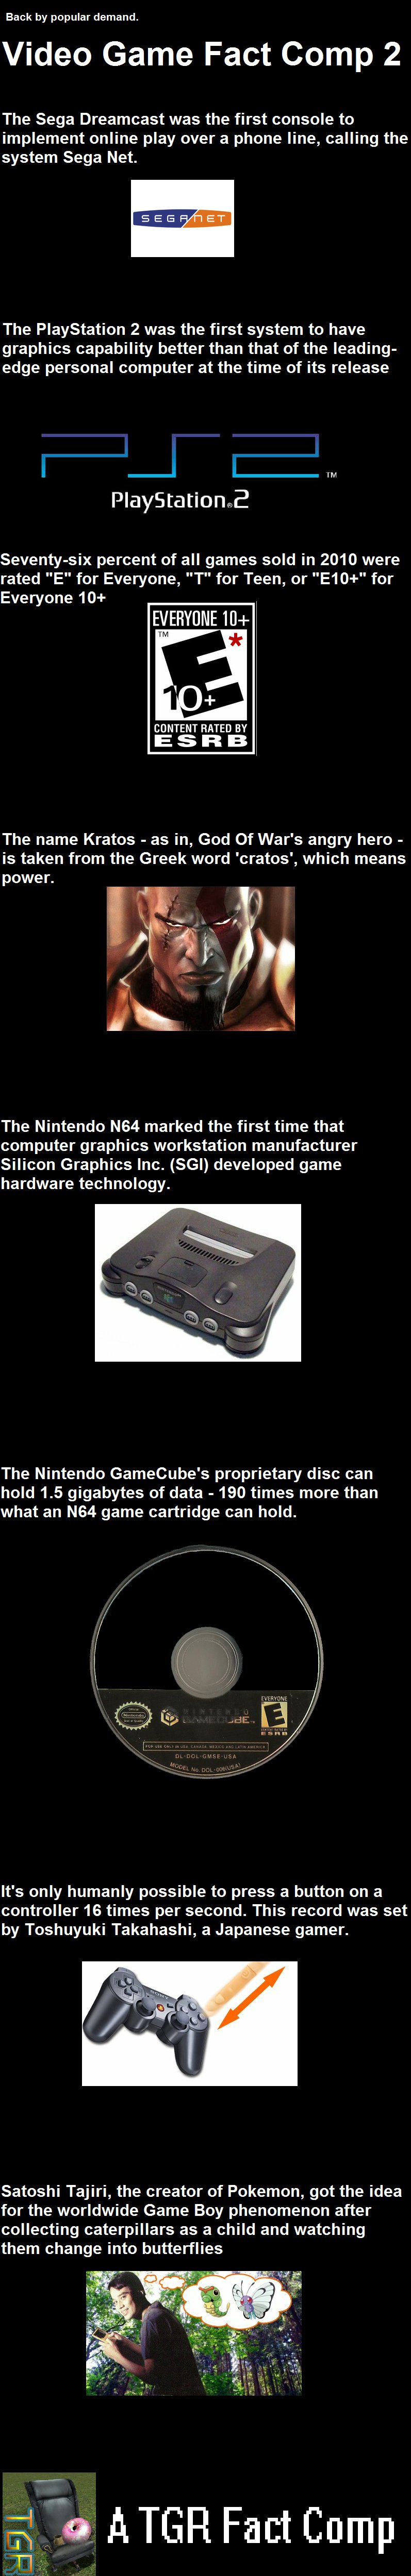 Video Game Fact Comp 2